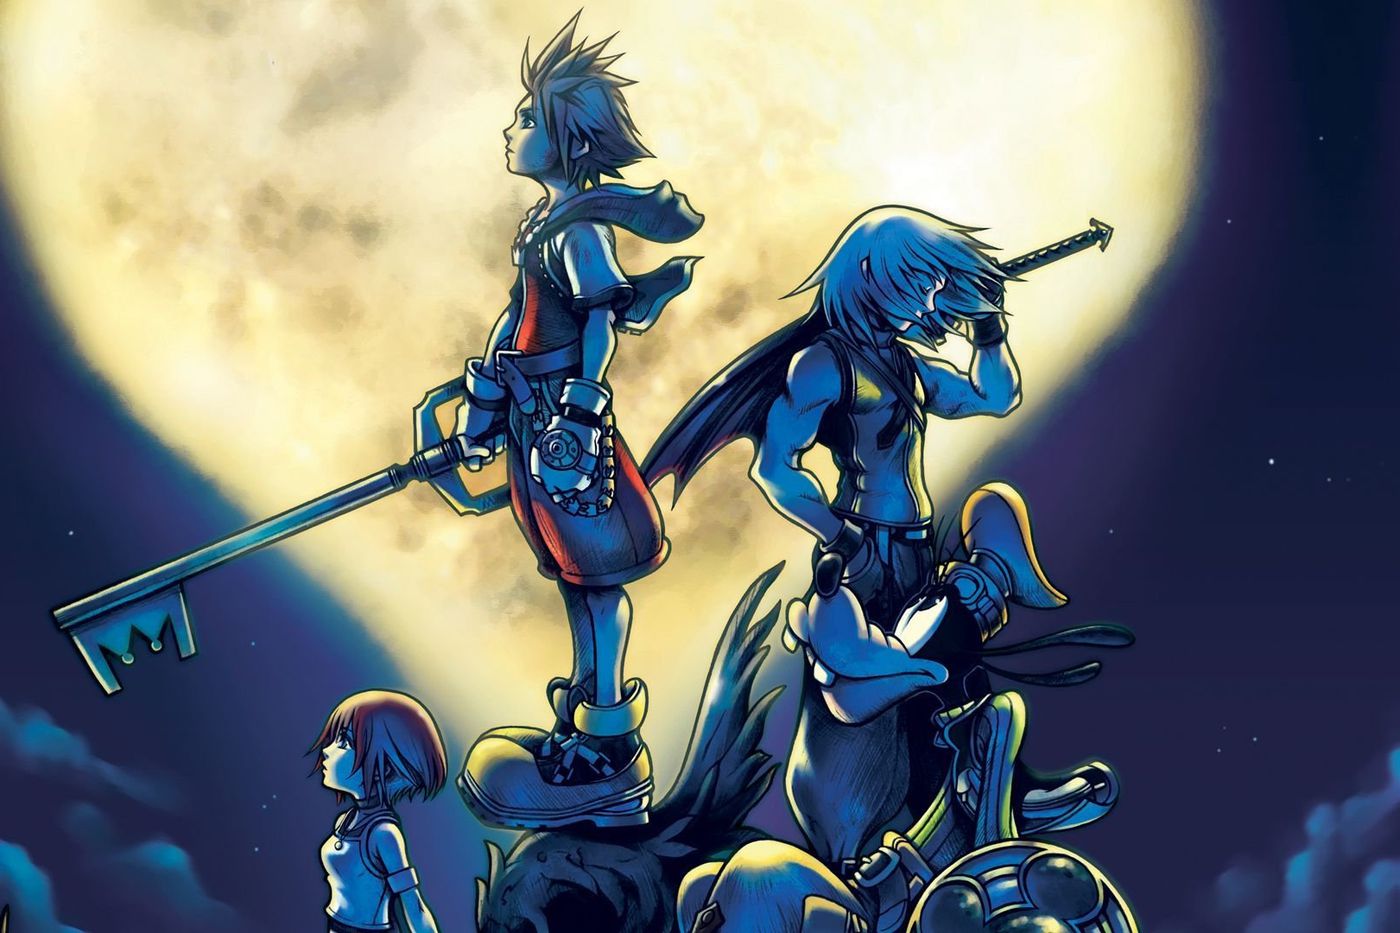 Almost years after playing kingdom hearts i love final fantasy